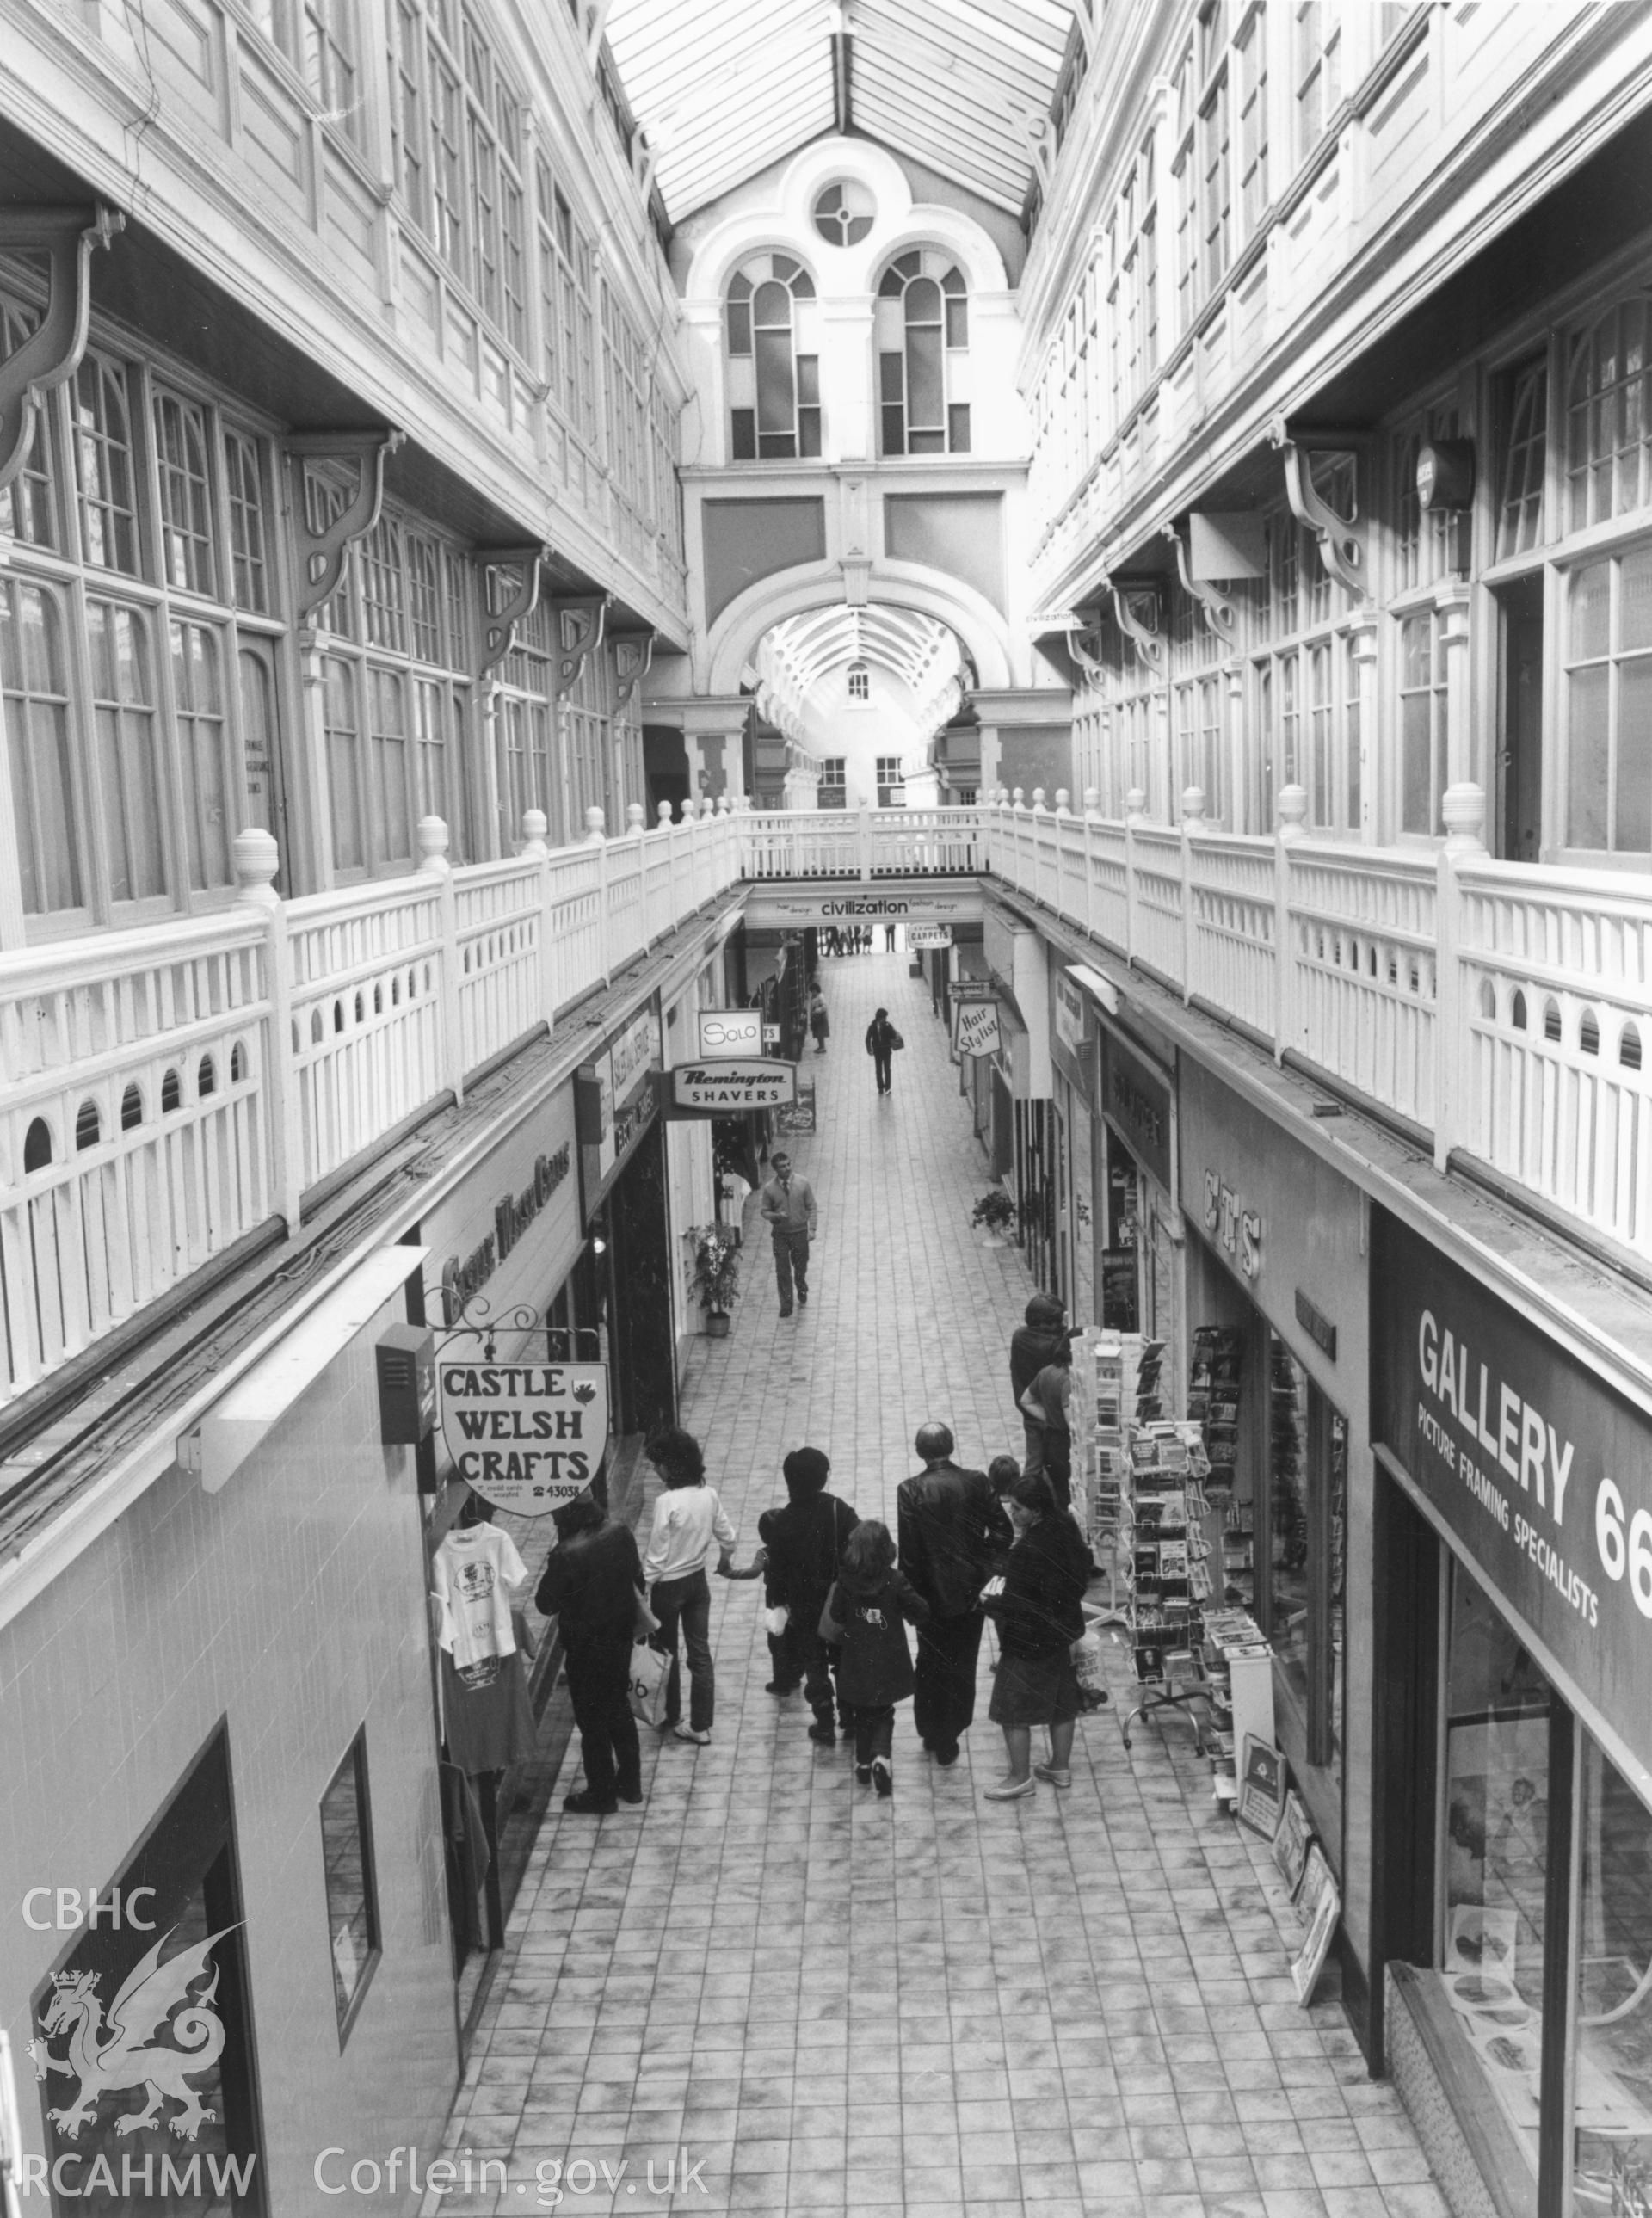 1 b/w print showing Castle Arcade, Cardiff, collated by the former Central Office of Information.